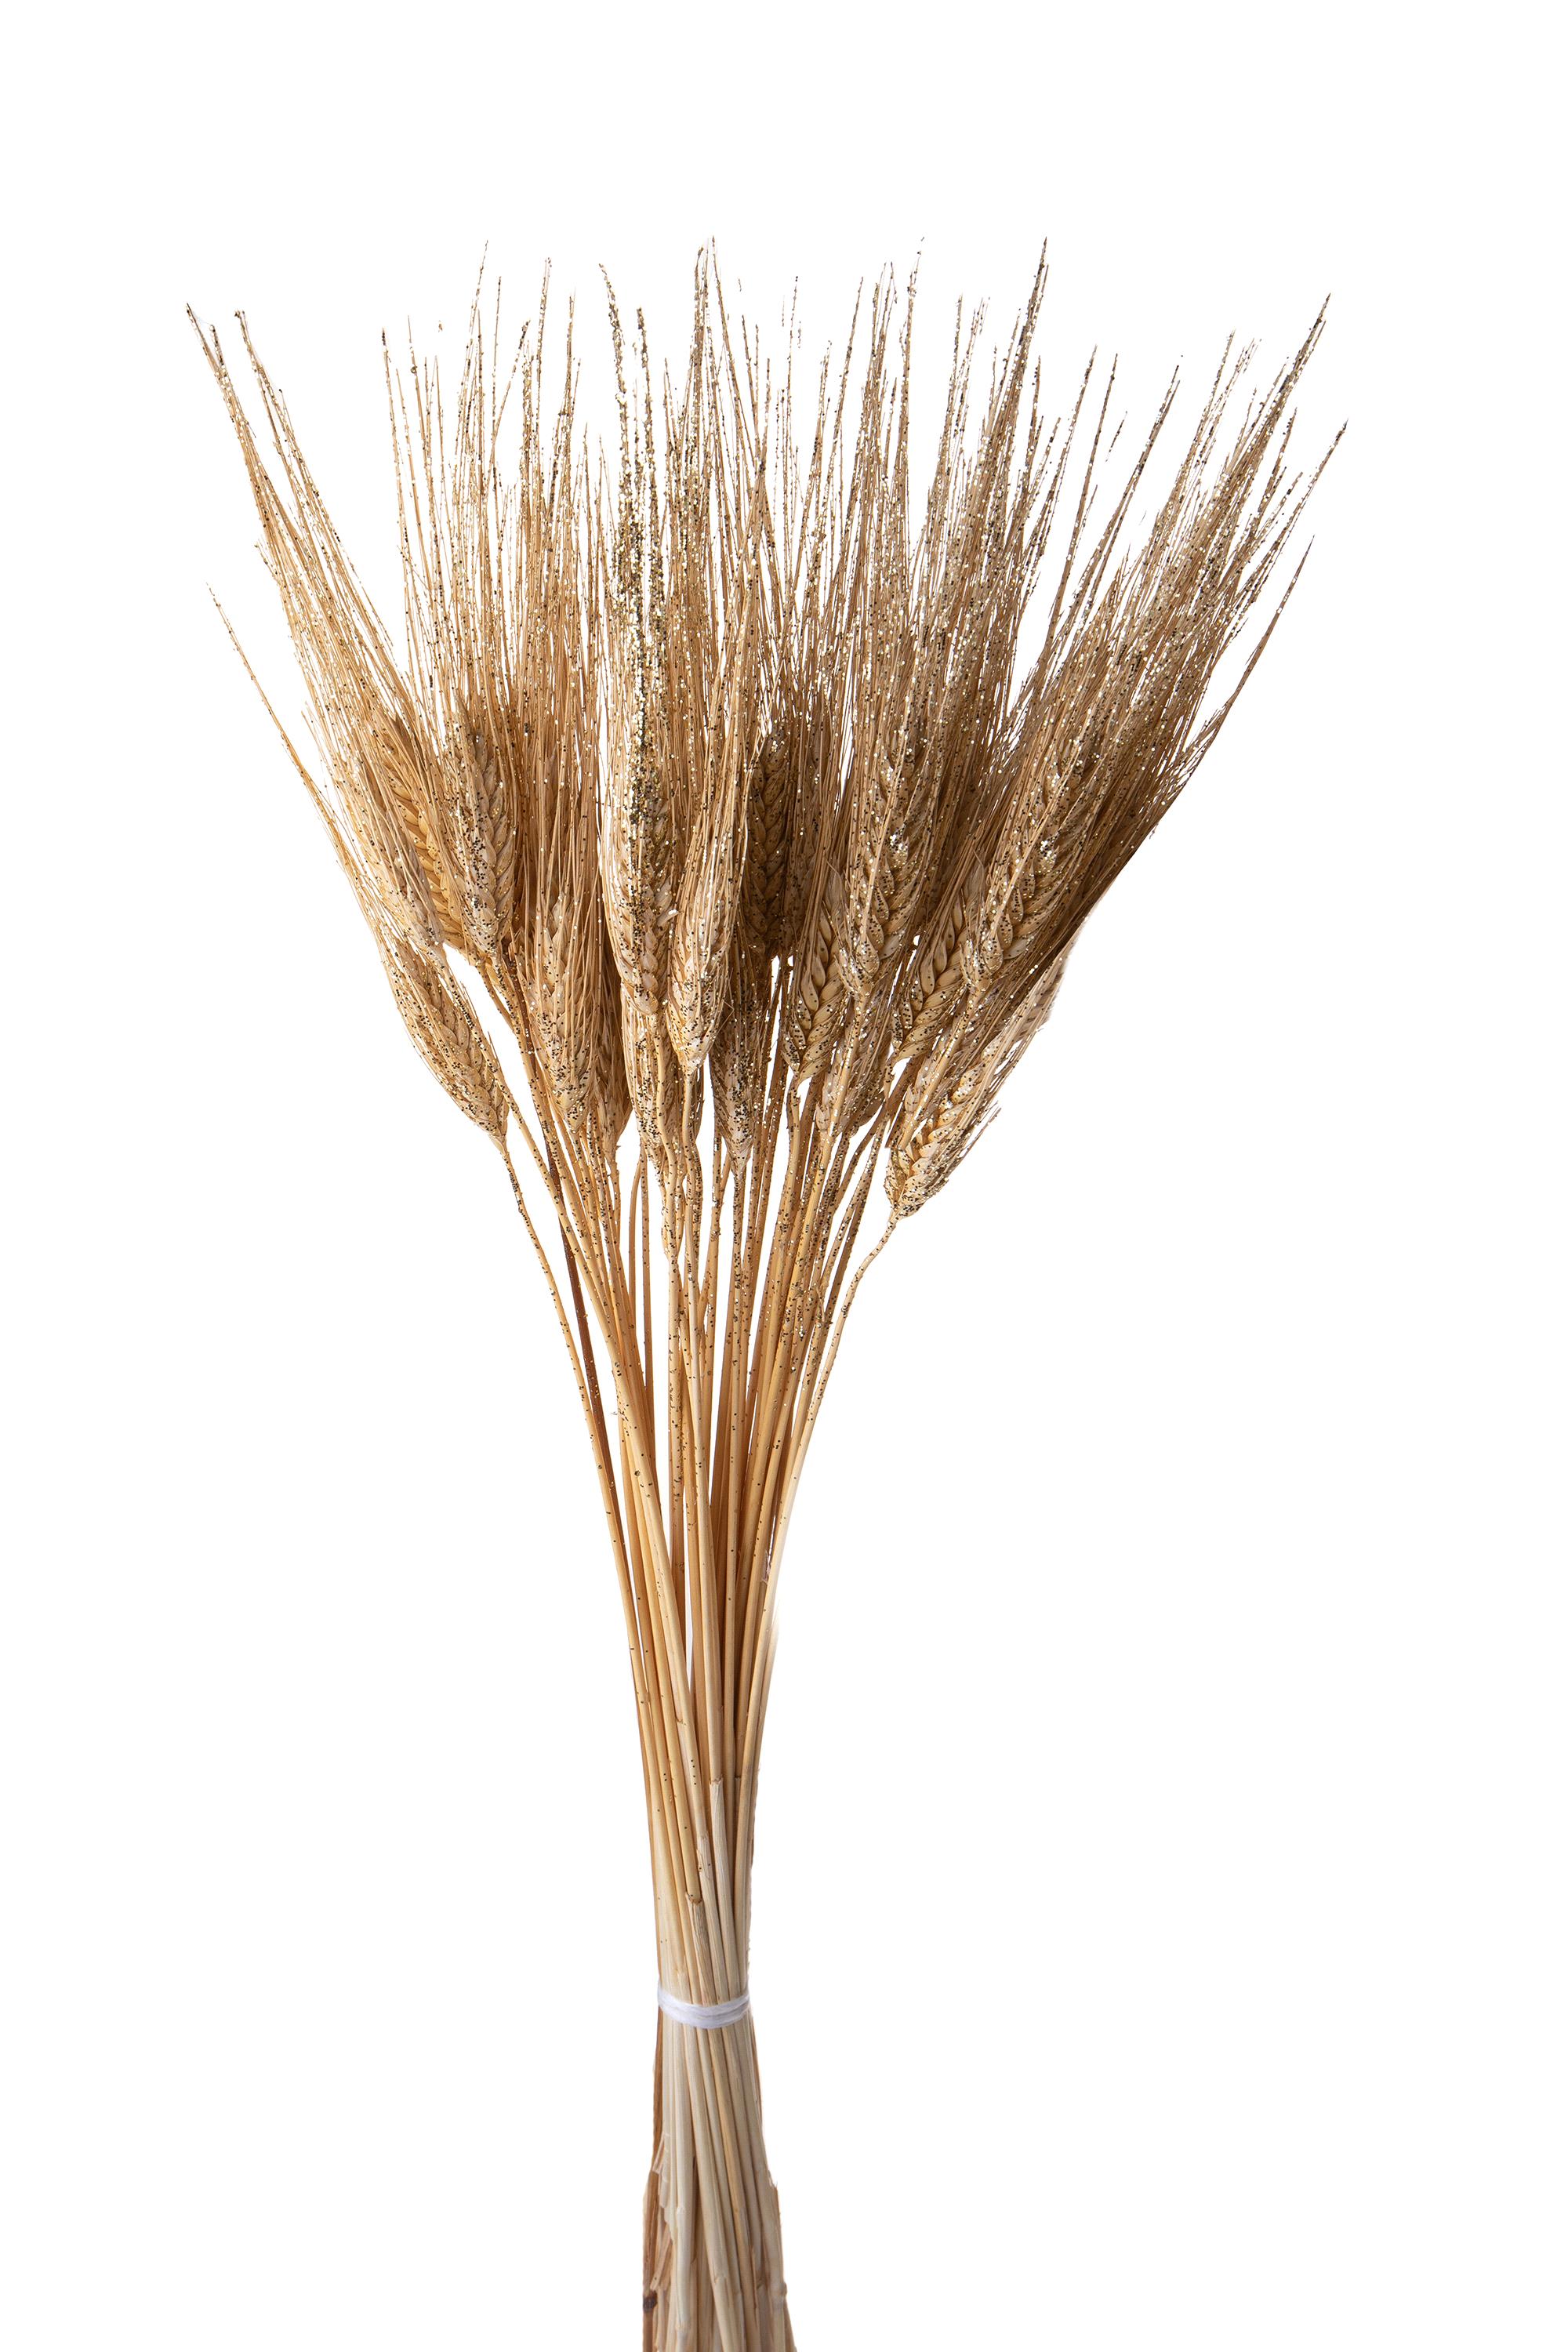 CHRISTMAS ITEMS, DRIED FLOWERS AND STEM ITEMS FOR CHRISTMAS, GRANO TRITICUM 50 PZ BAF/BIAN C/BRILL